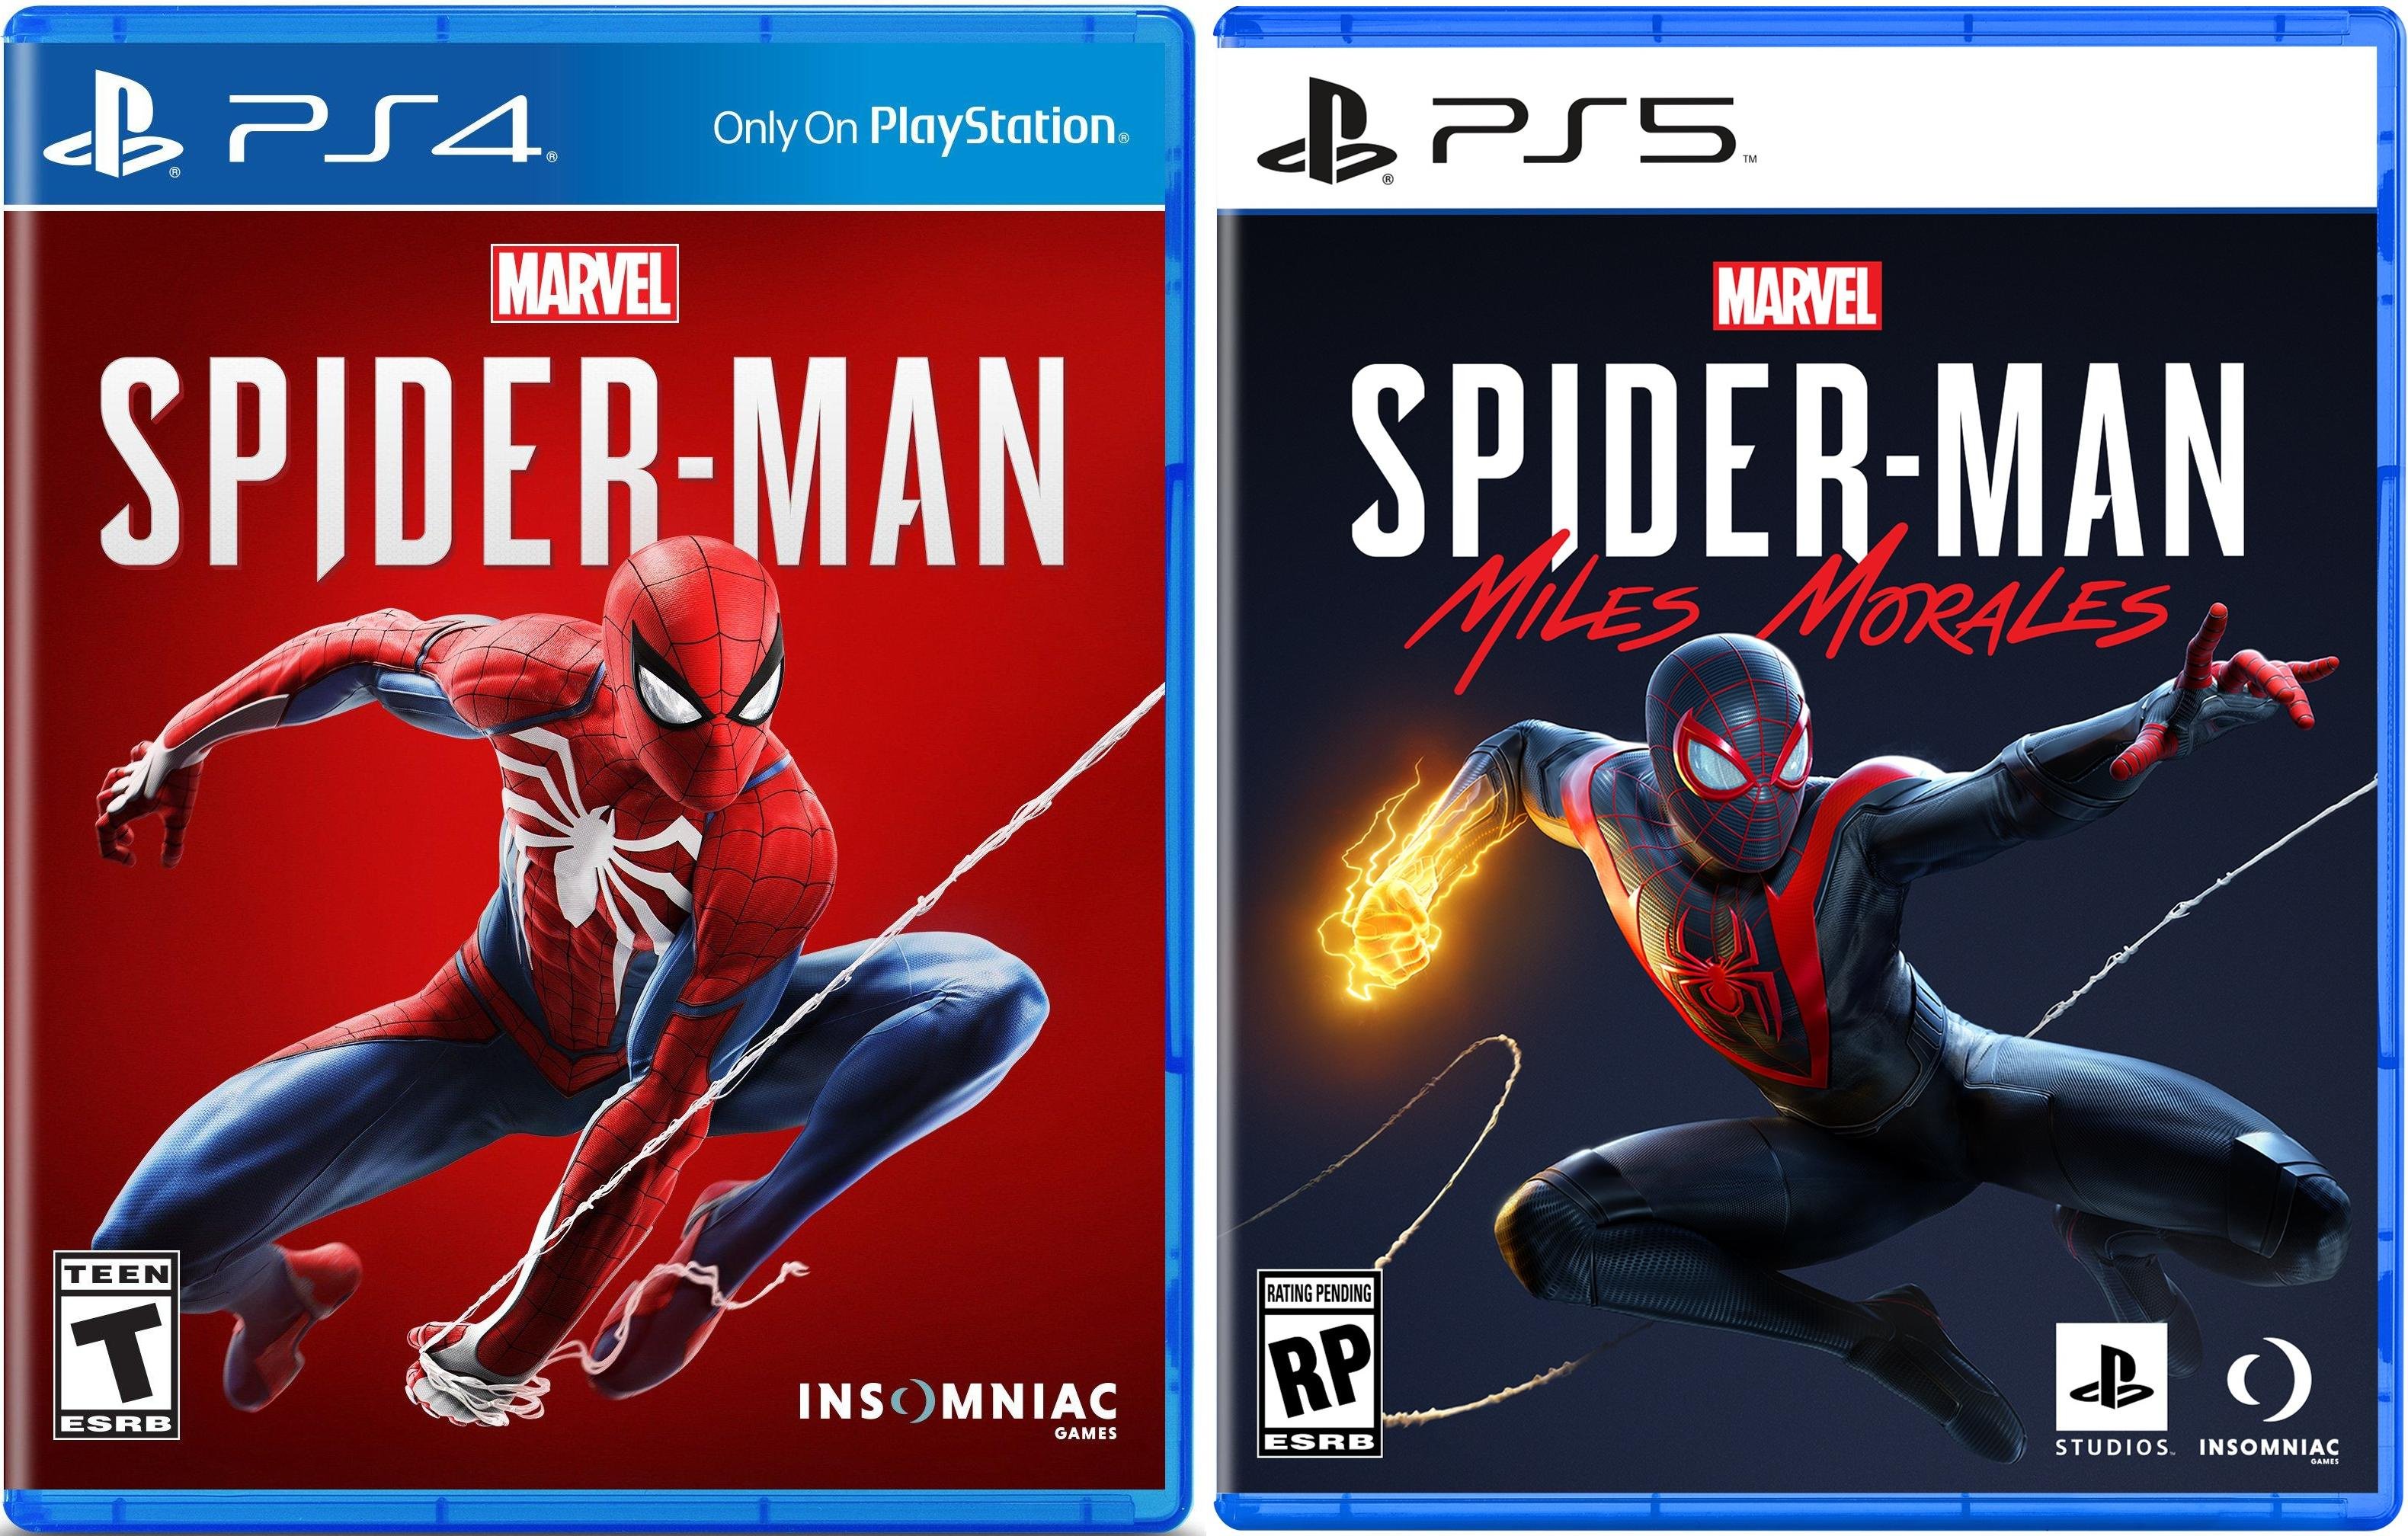 Here S Your First Look At Official Ps5 Game Box Art Push Square